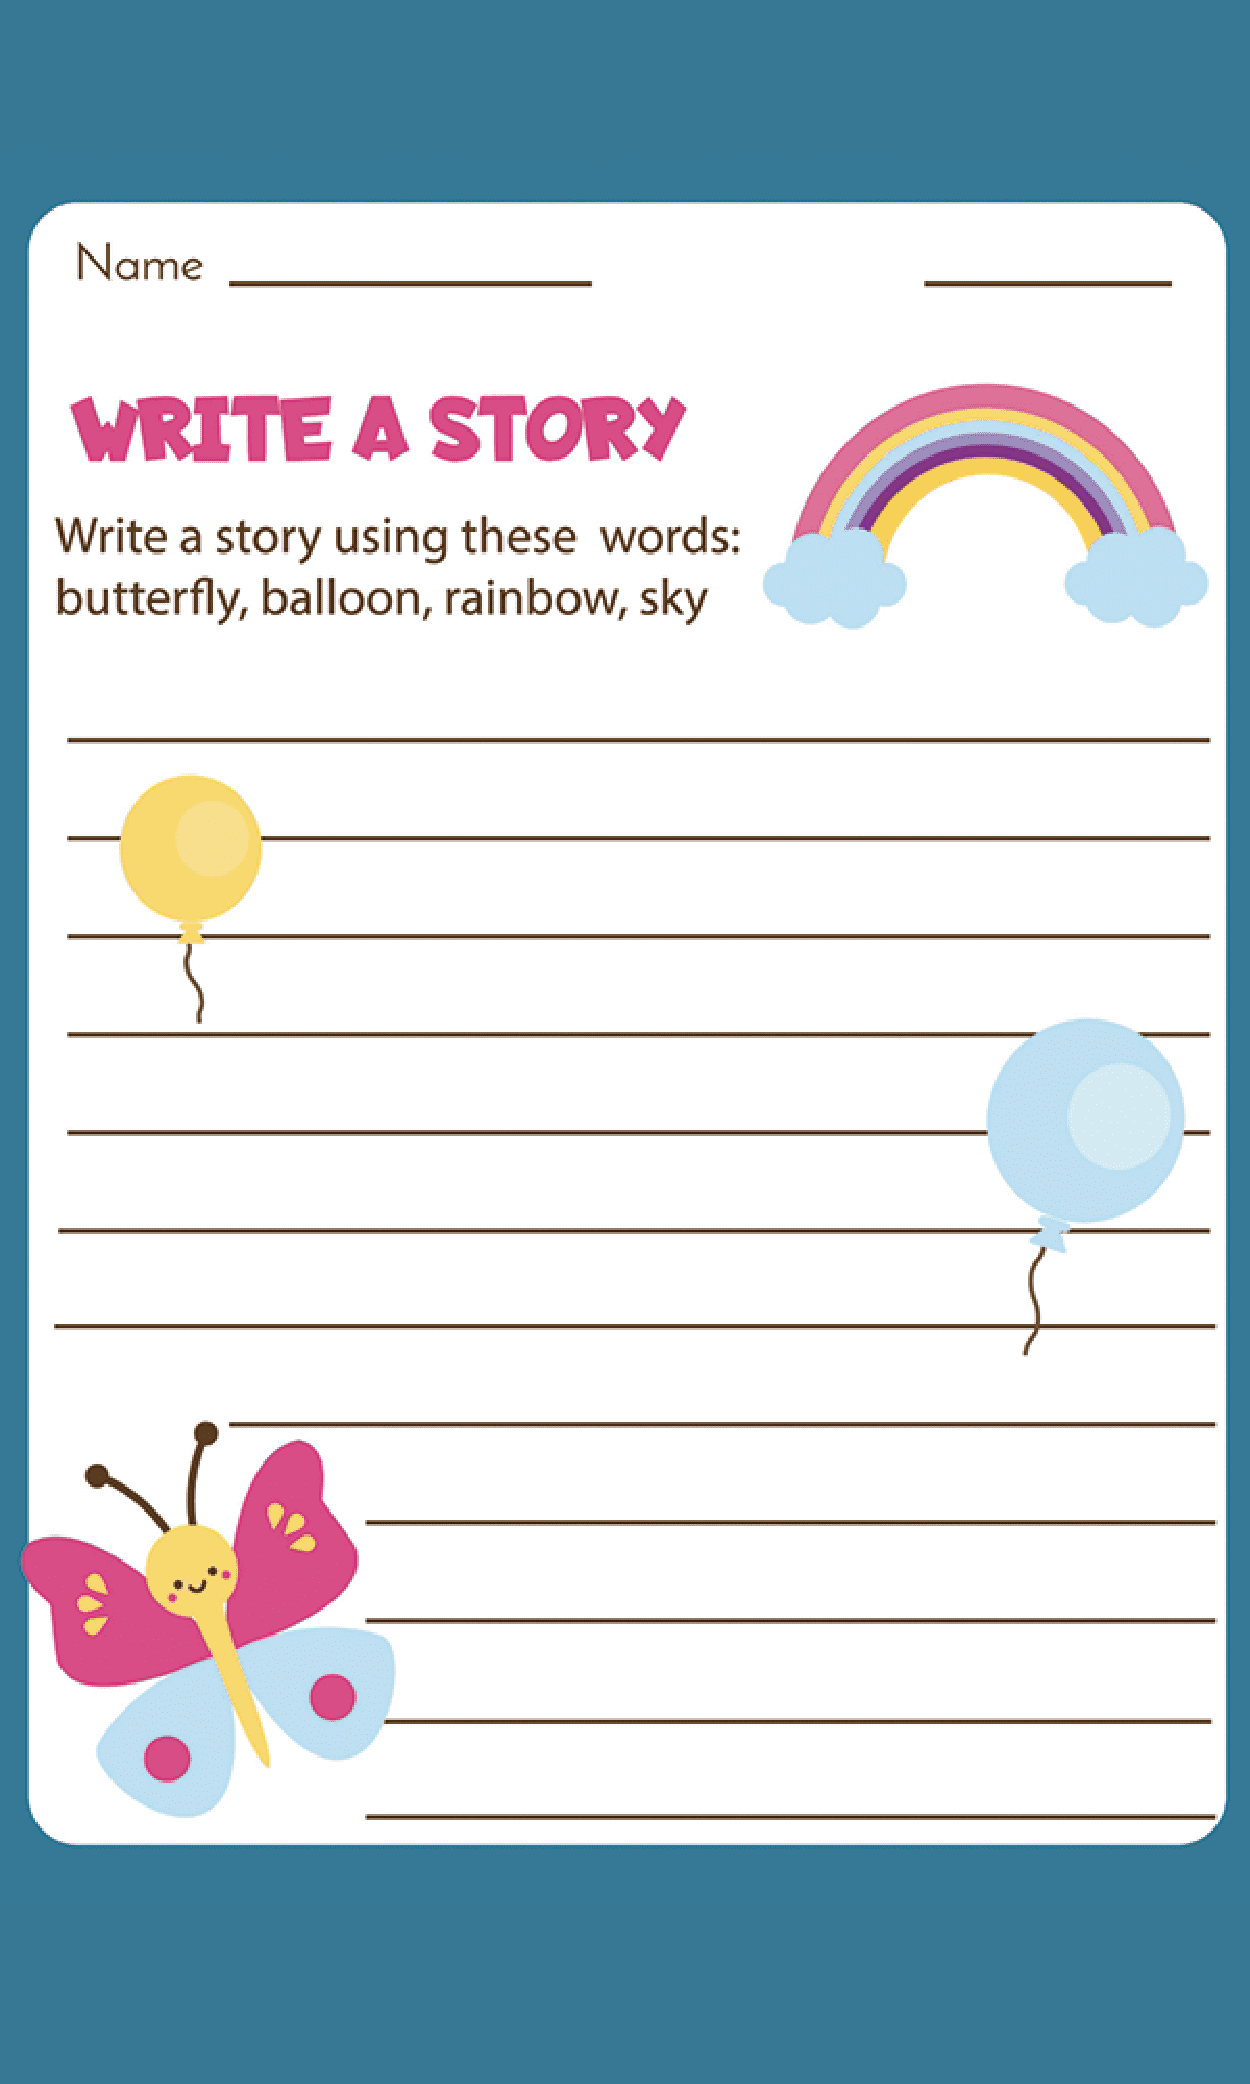 Write-A-Story-Butterfly-Worksheet